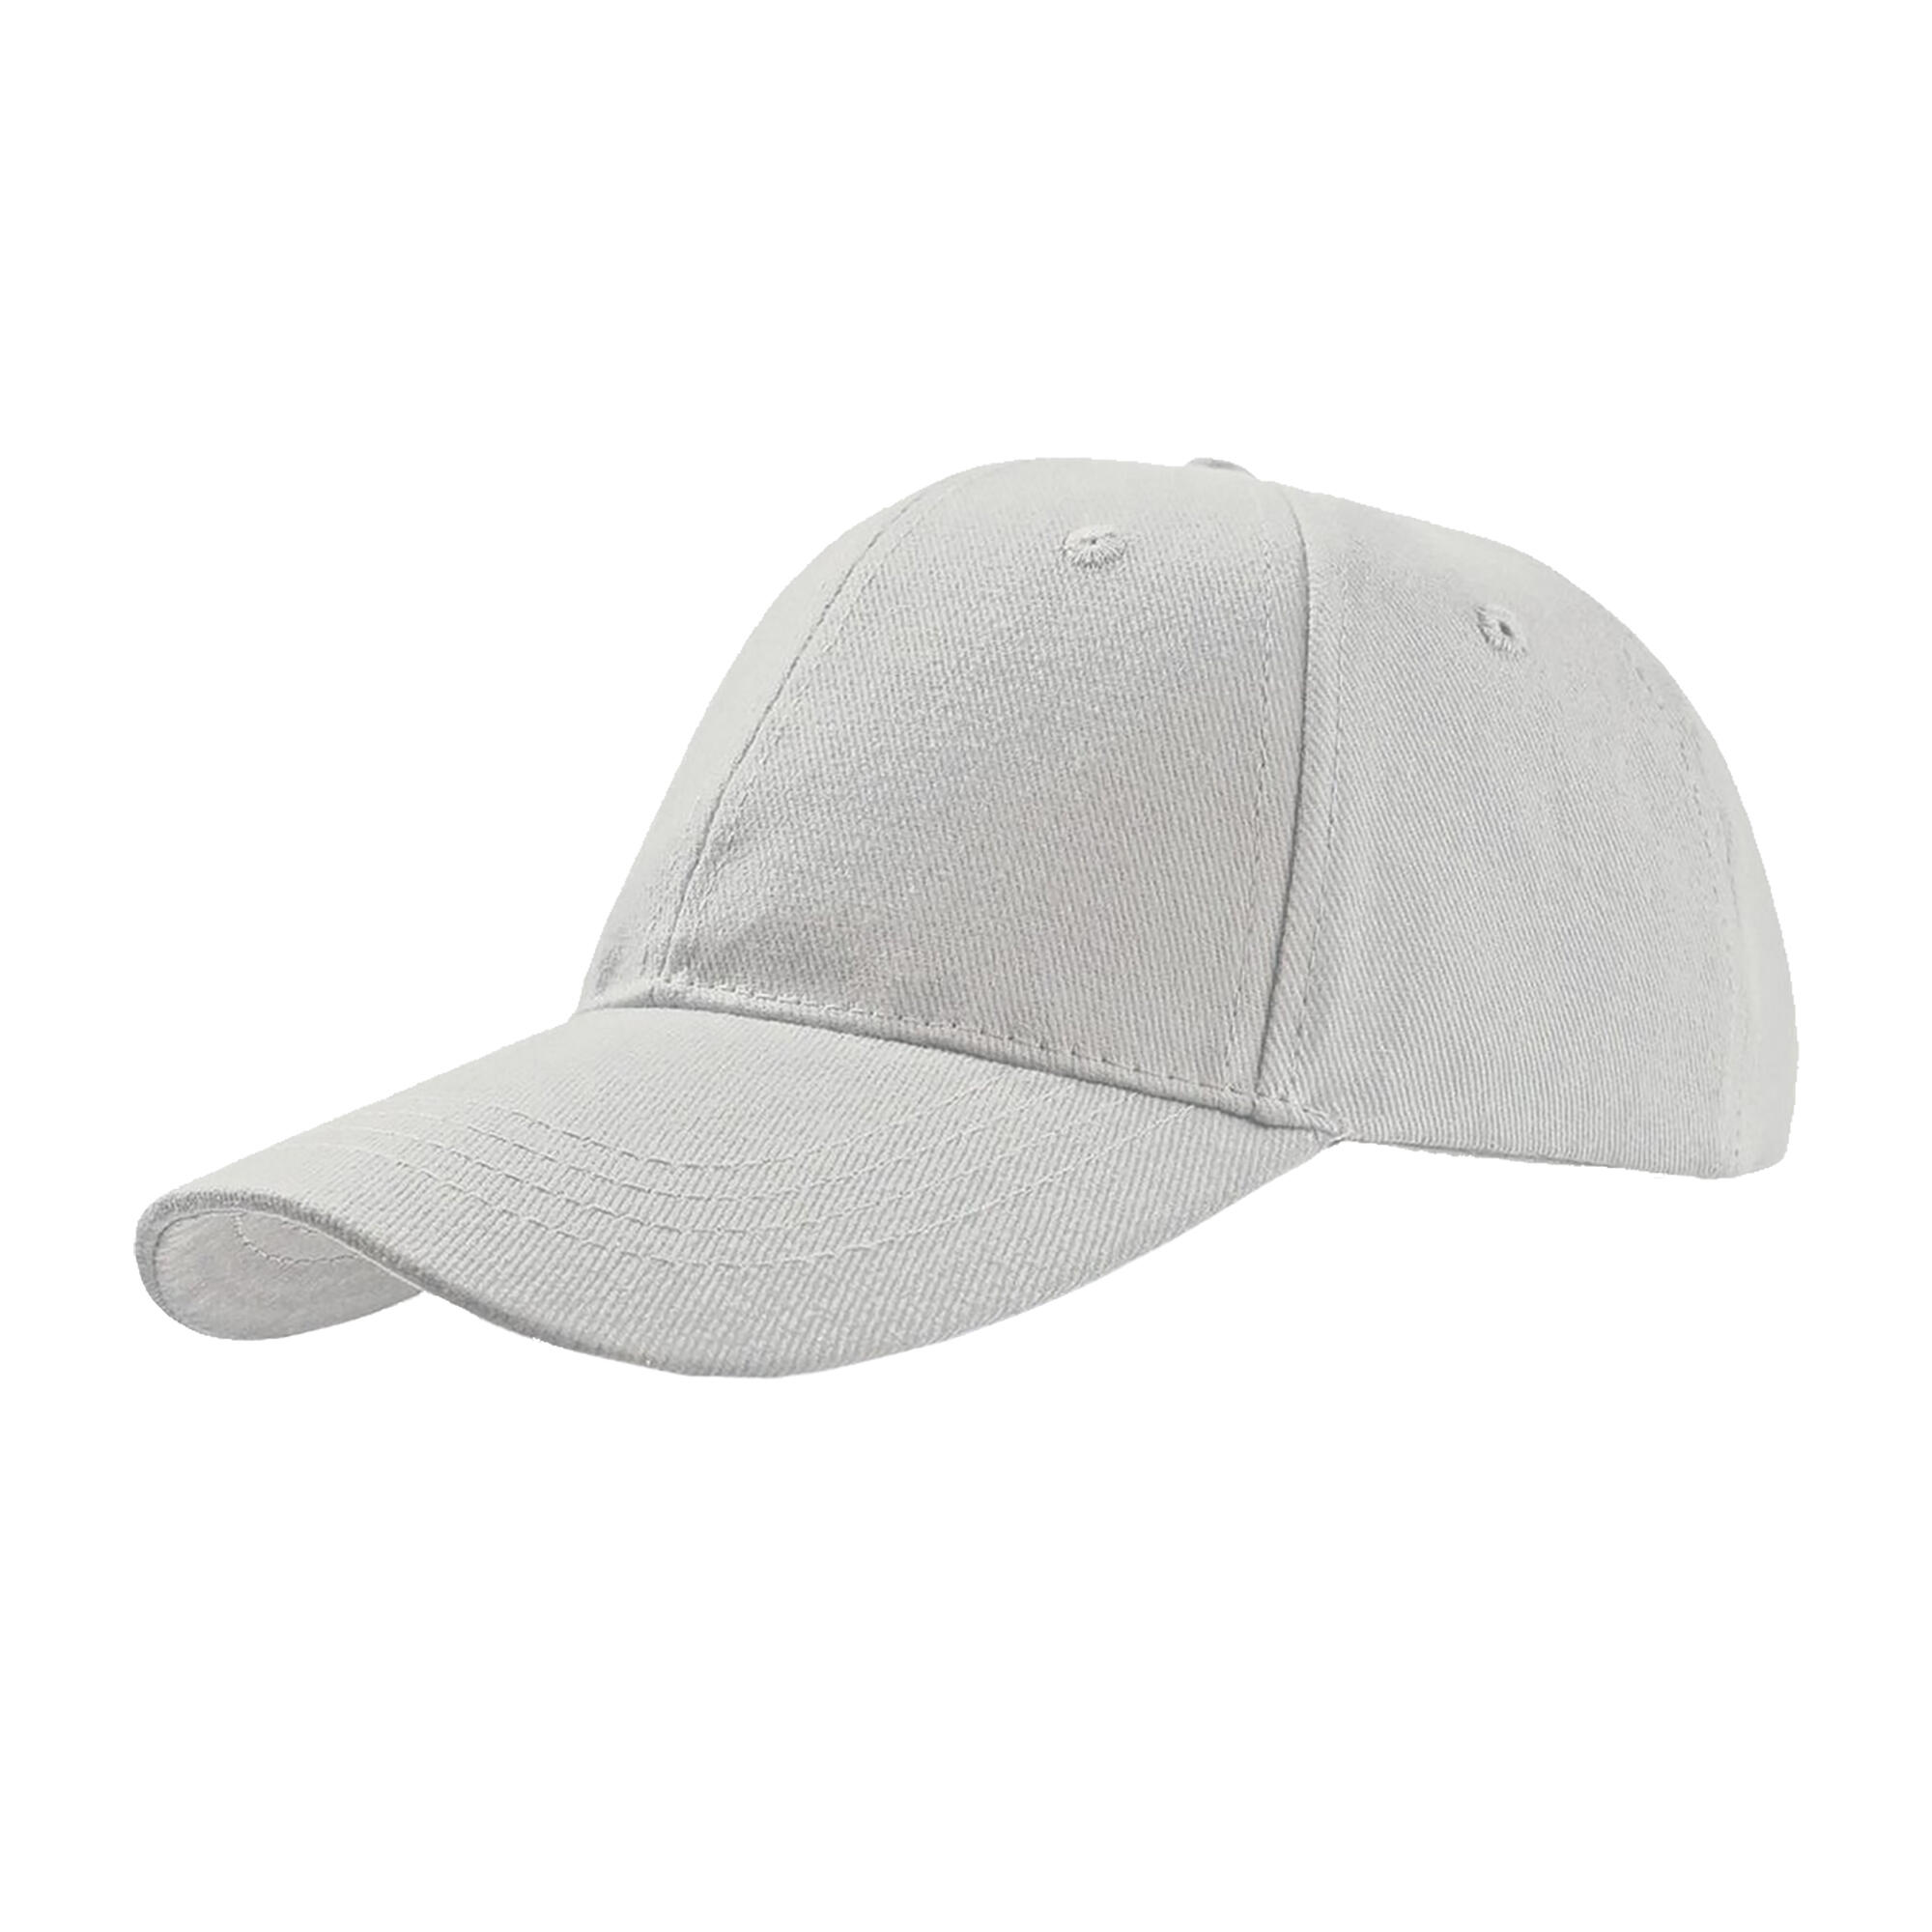 Liberty Six Buckle Brushed Cotton 6 Panel Cap (White) 1/3